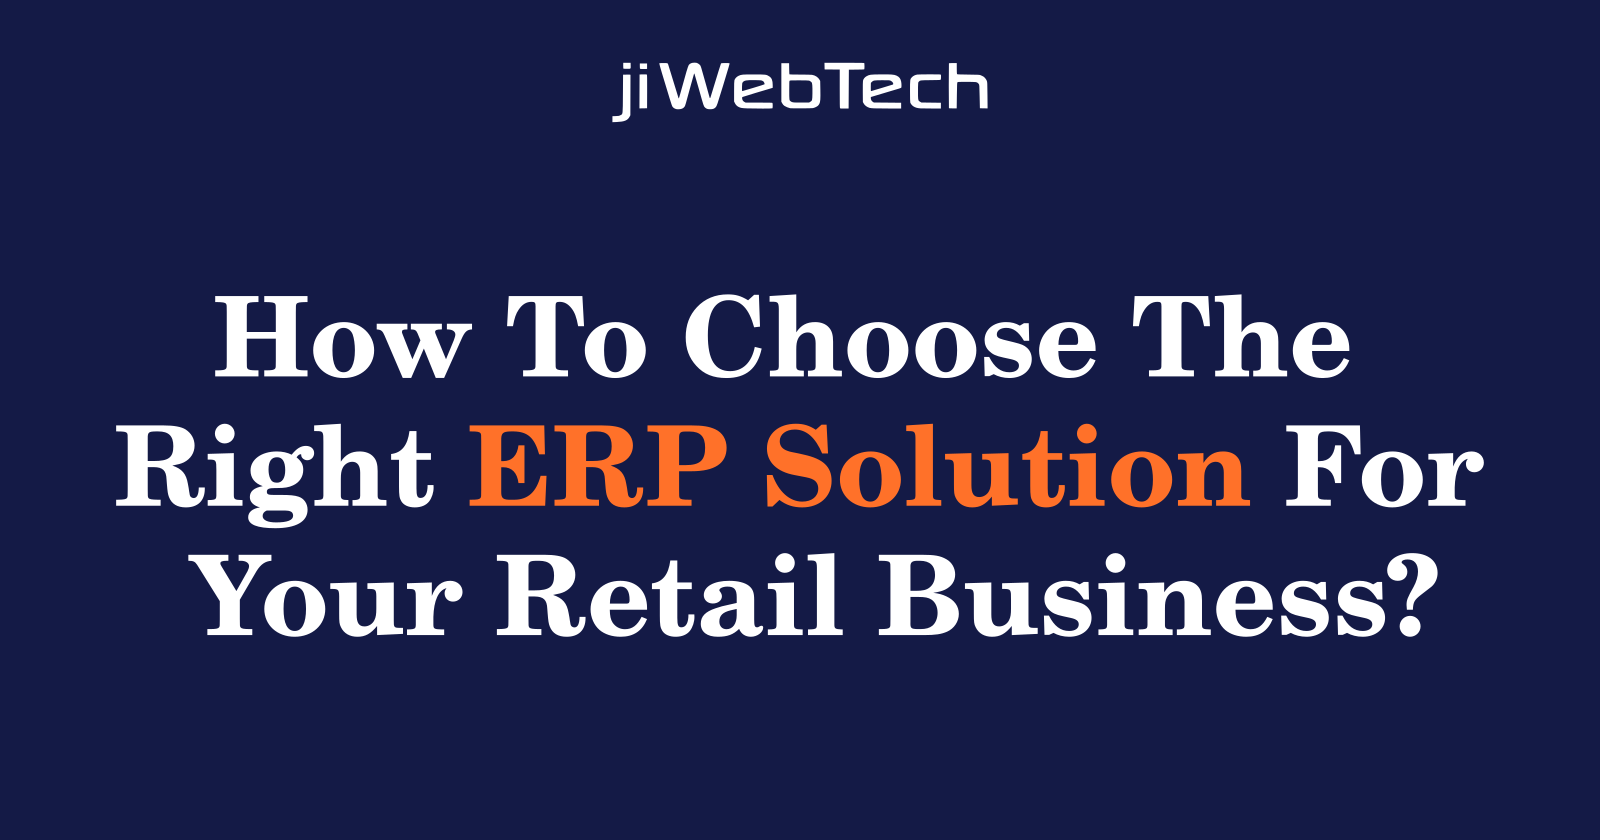 How To Choose The Right ERP Solution For Your Retail Business?